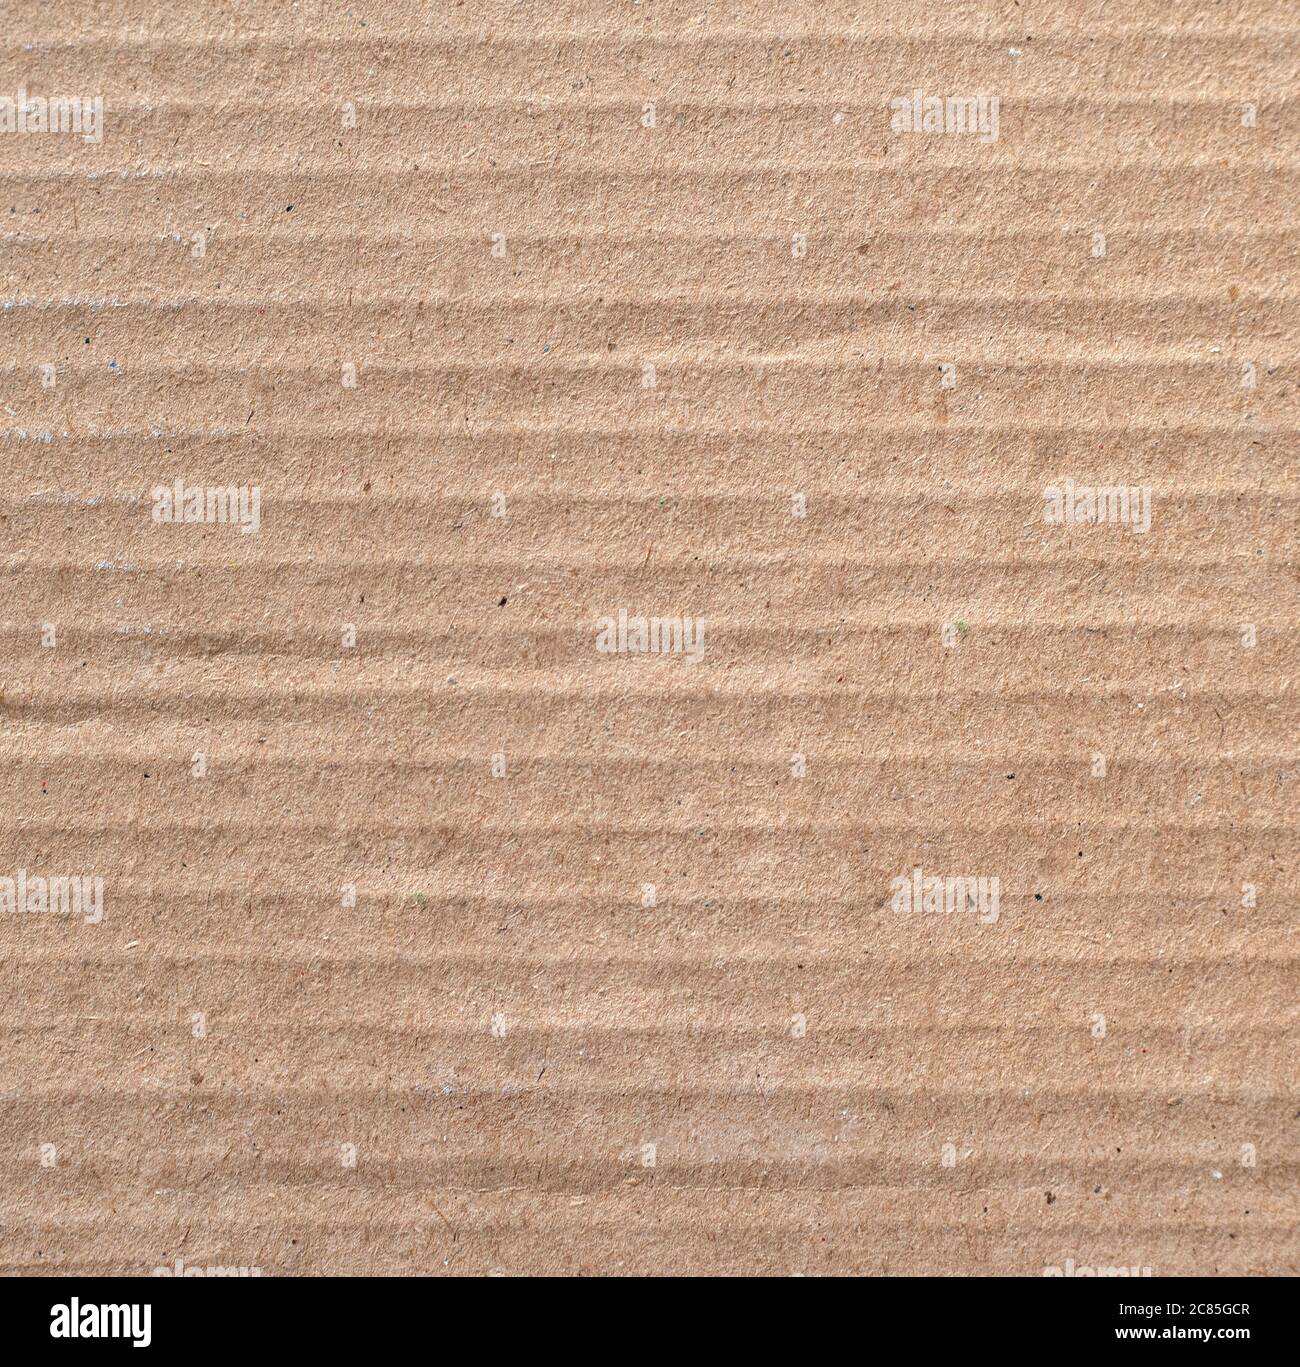 Real cardboard texture background. Stock Photo